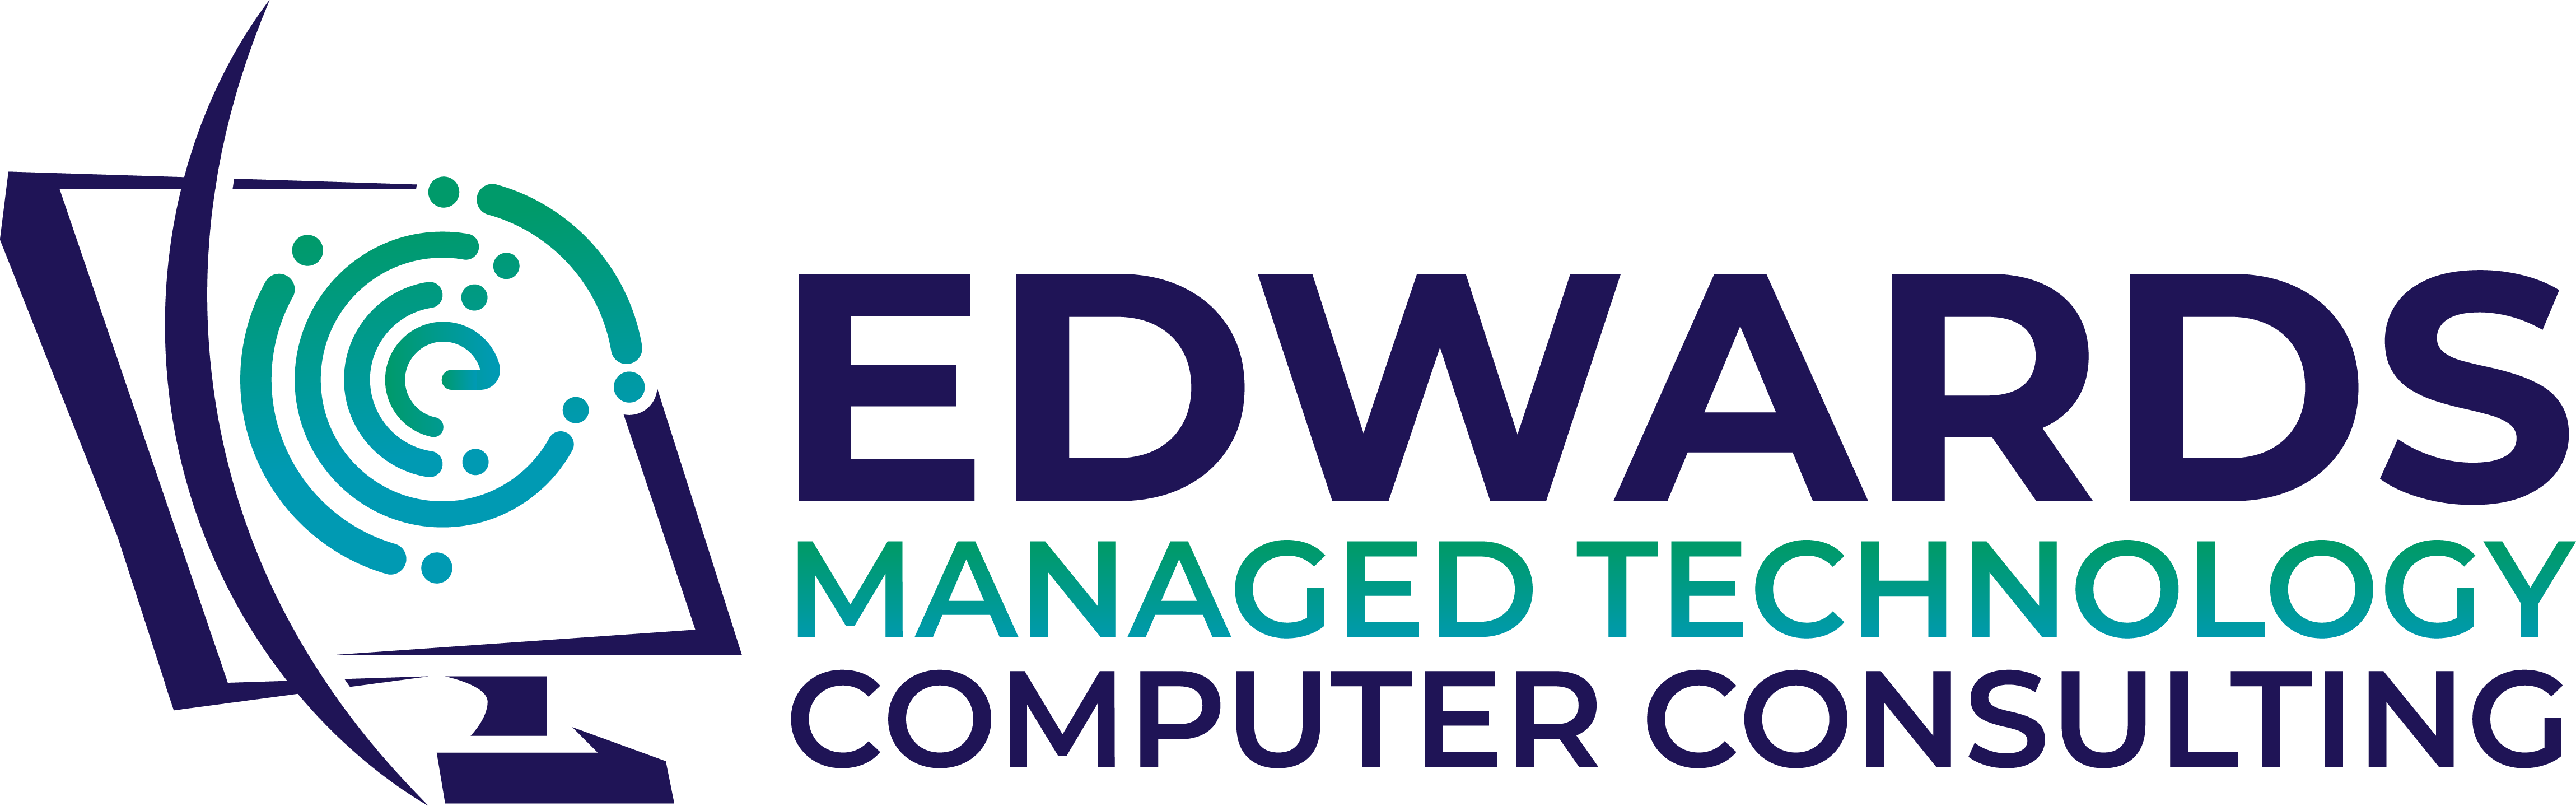 EMTCC – Edwards Managed Technology Computer Consulting